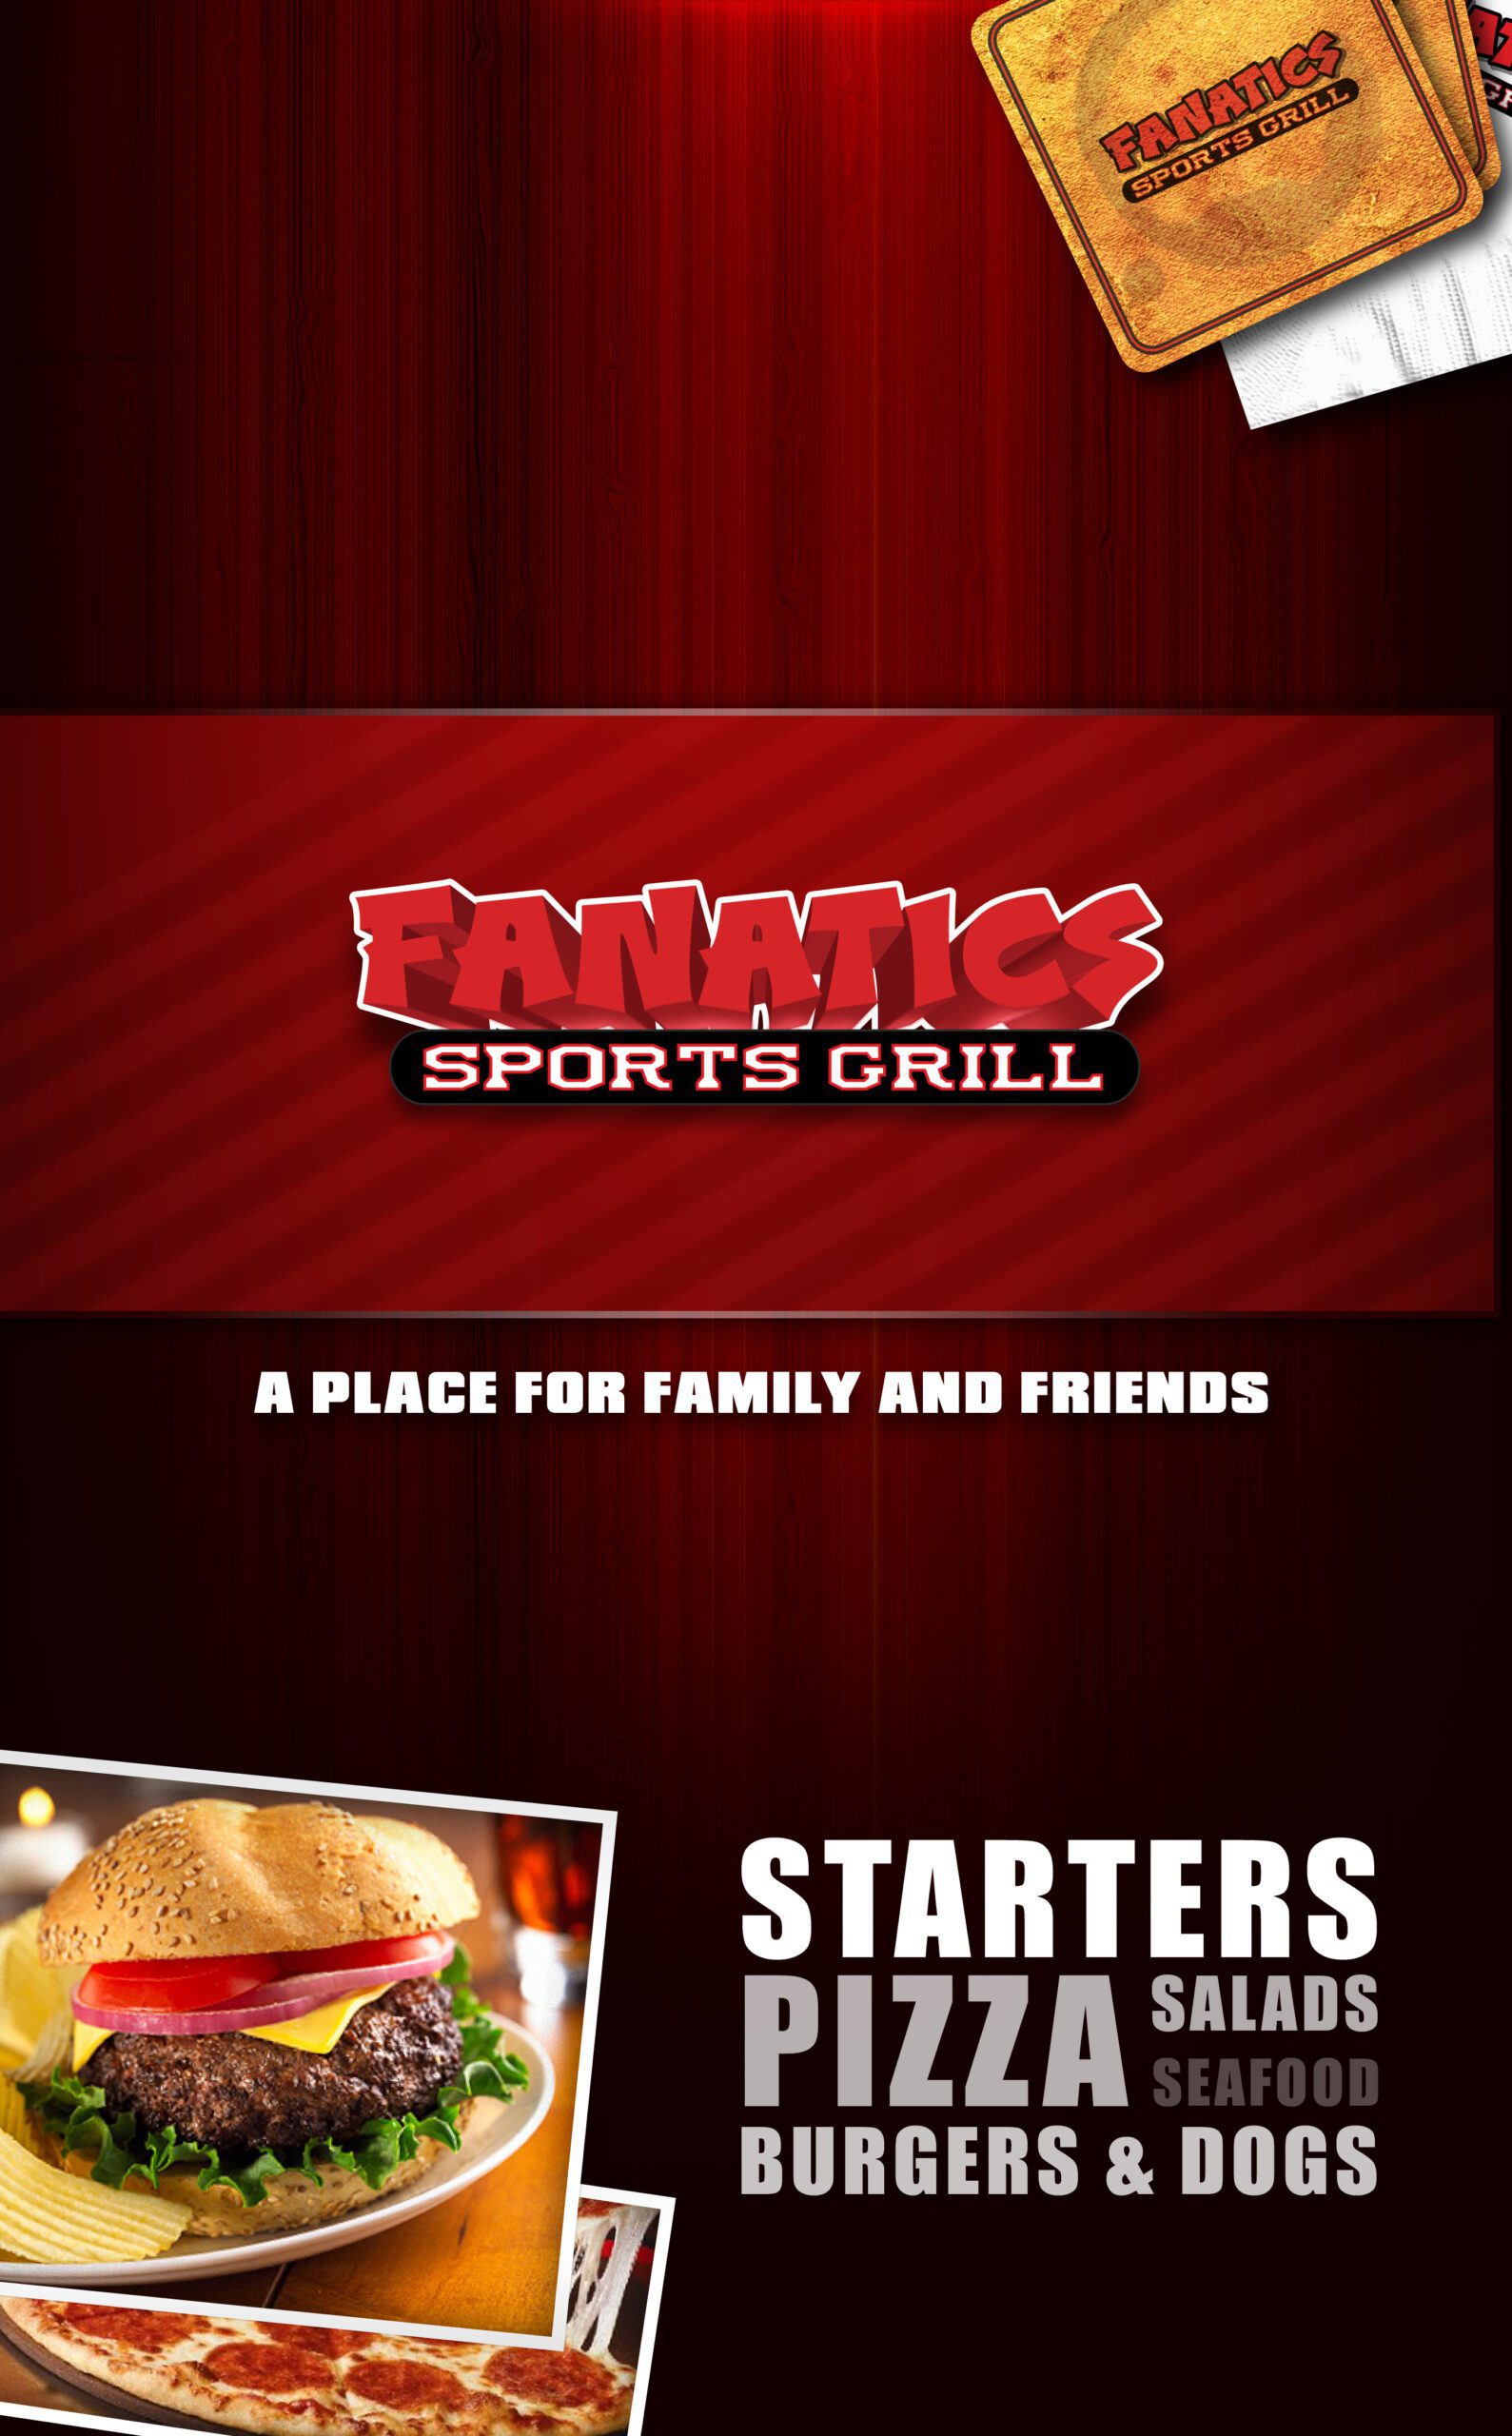 Fanatics Sports Grill Restaurant Marketing Package | Graphic Design | Graphic, Print, Logo, and Website Design Solutions serving locally for Tempe Arizona and Phoenix Valley Cities